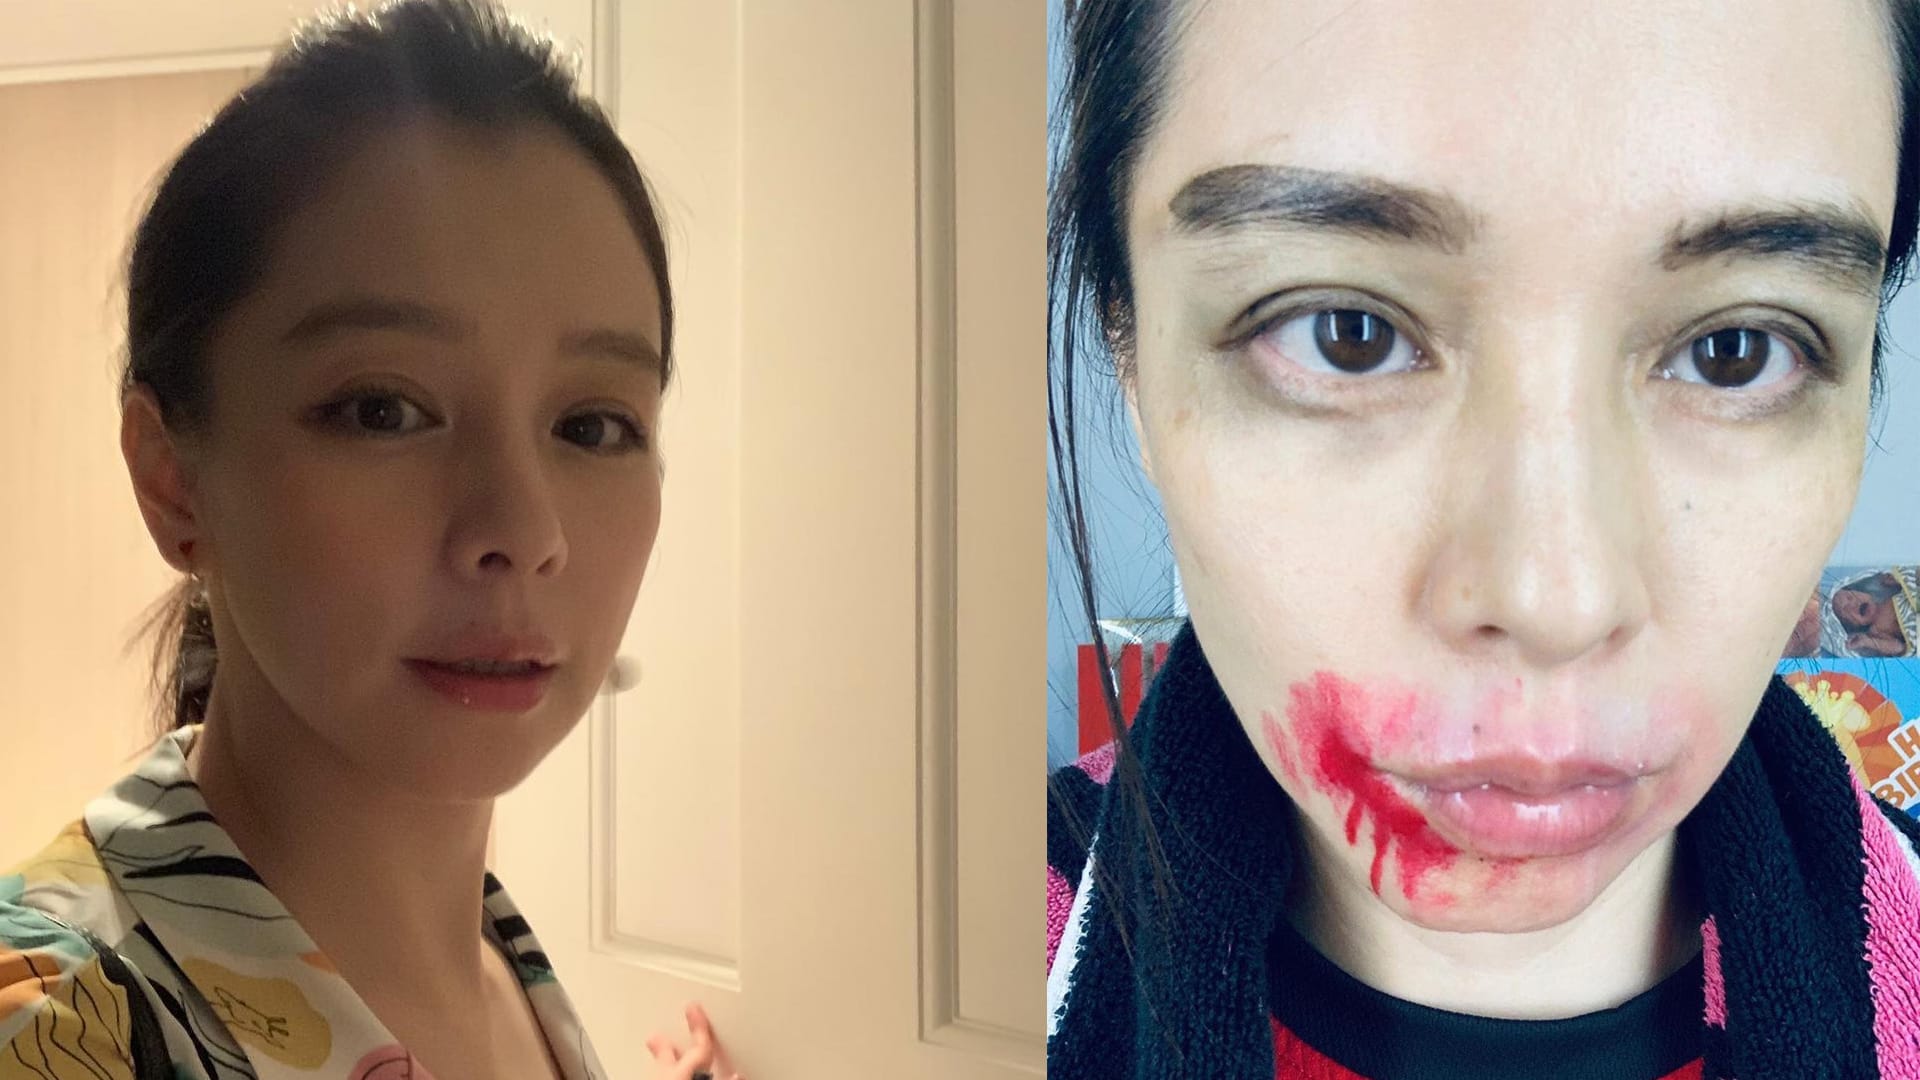 Vivian Hsu Is Not A Victim Of Domestic Violence, Despite What Her Recent Photo Suggests